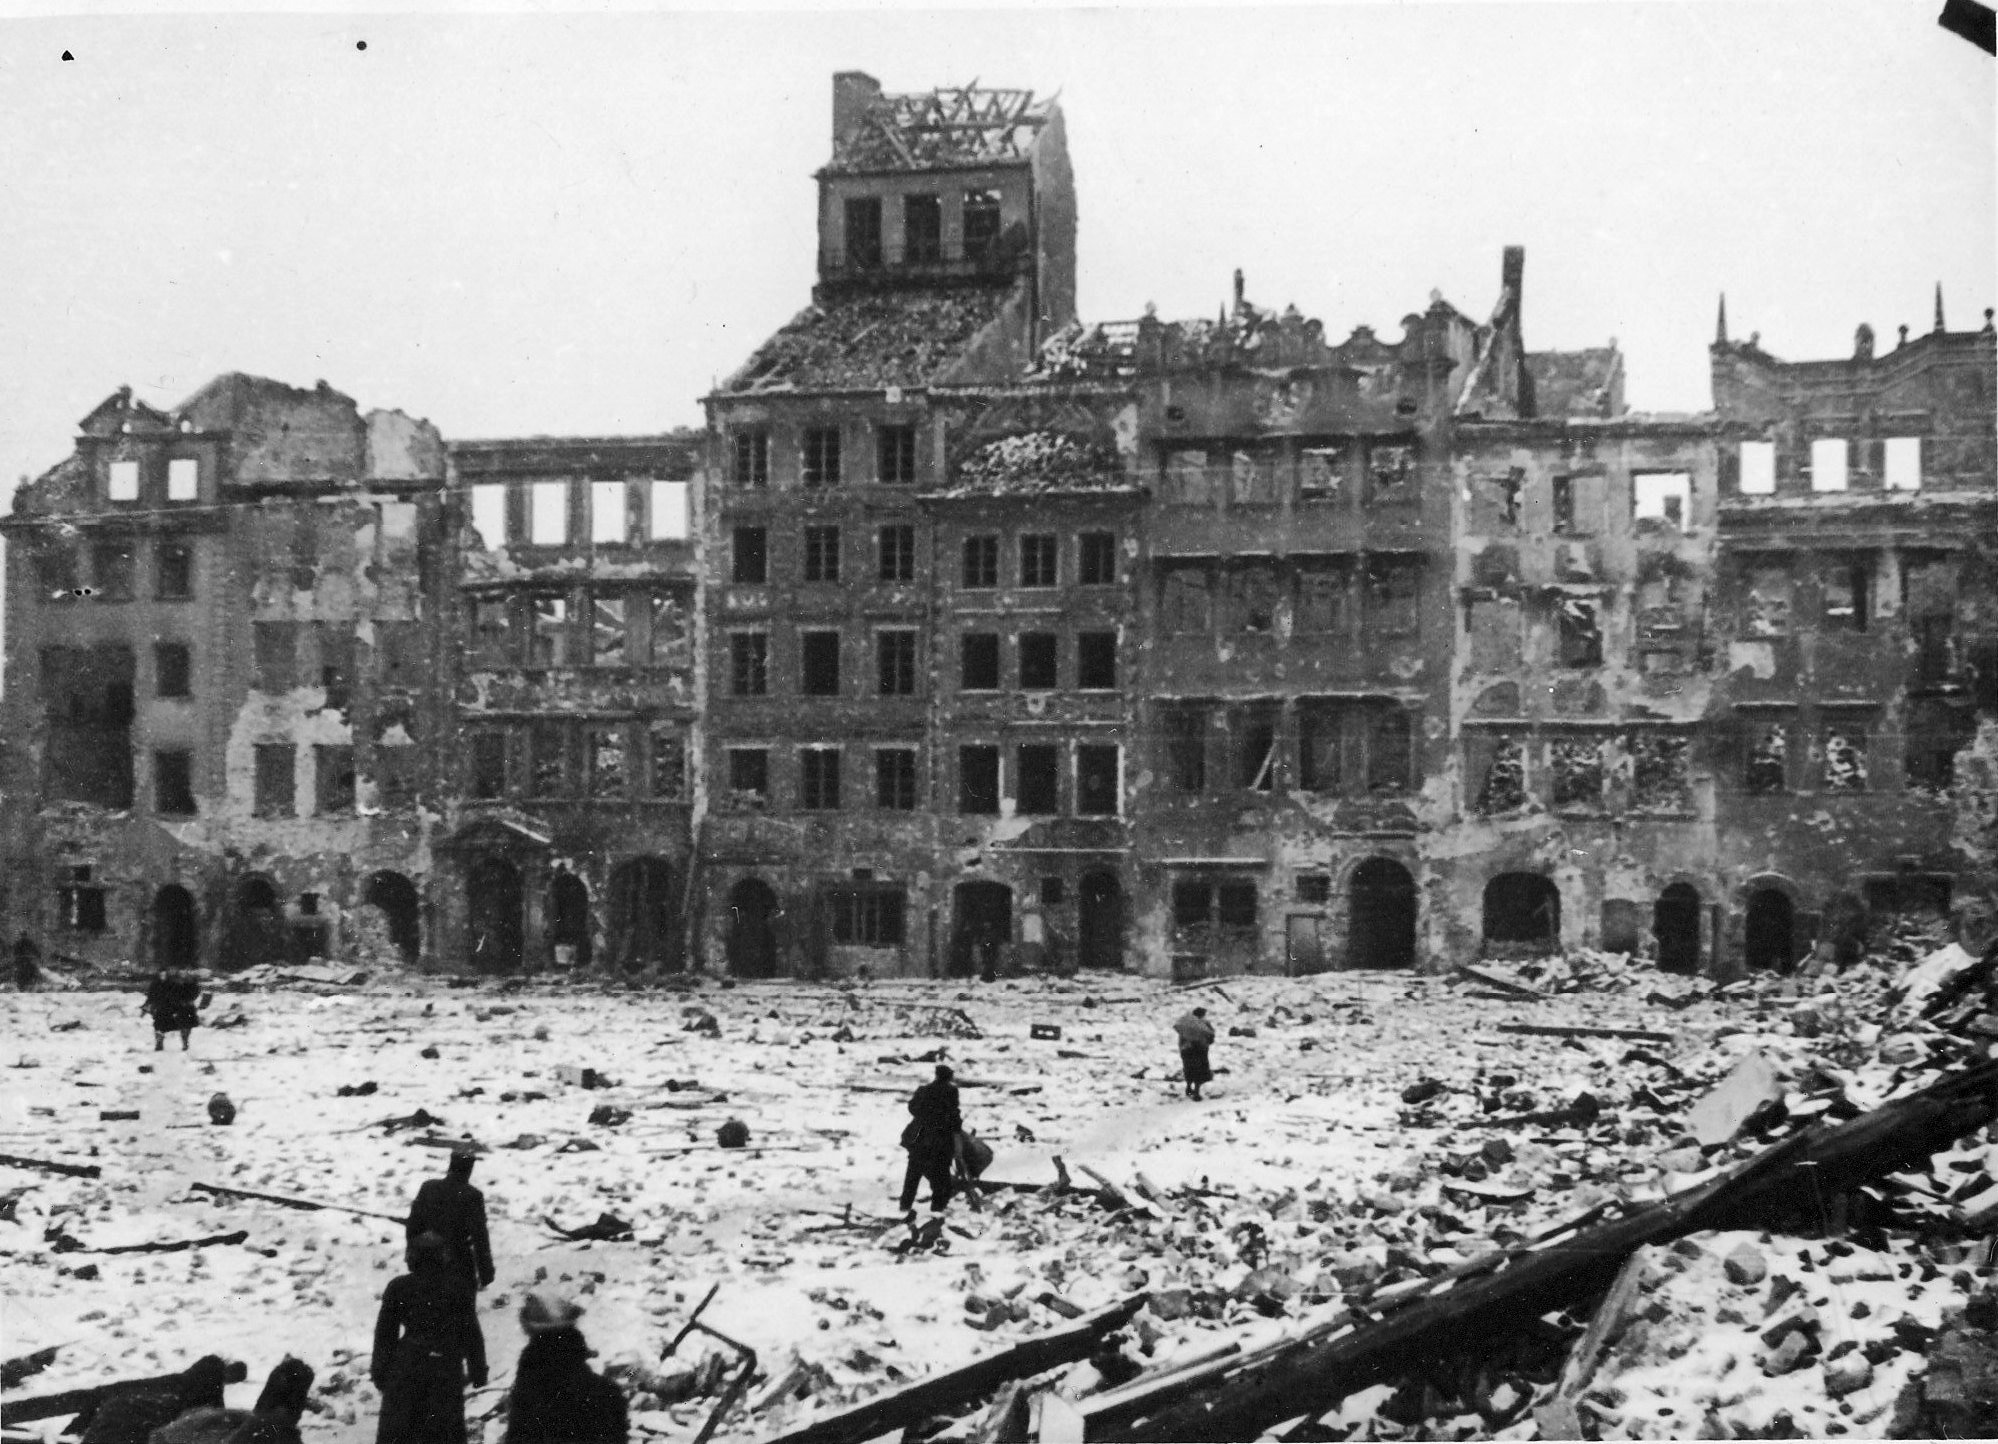 The Old Town and Square were almost completely destroyed by 1945...